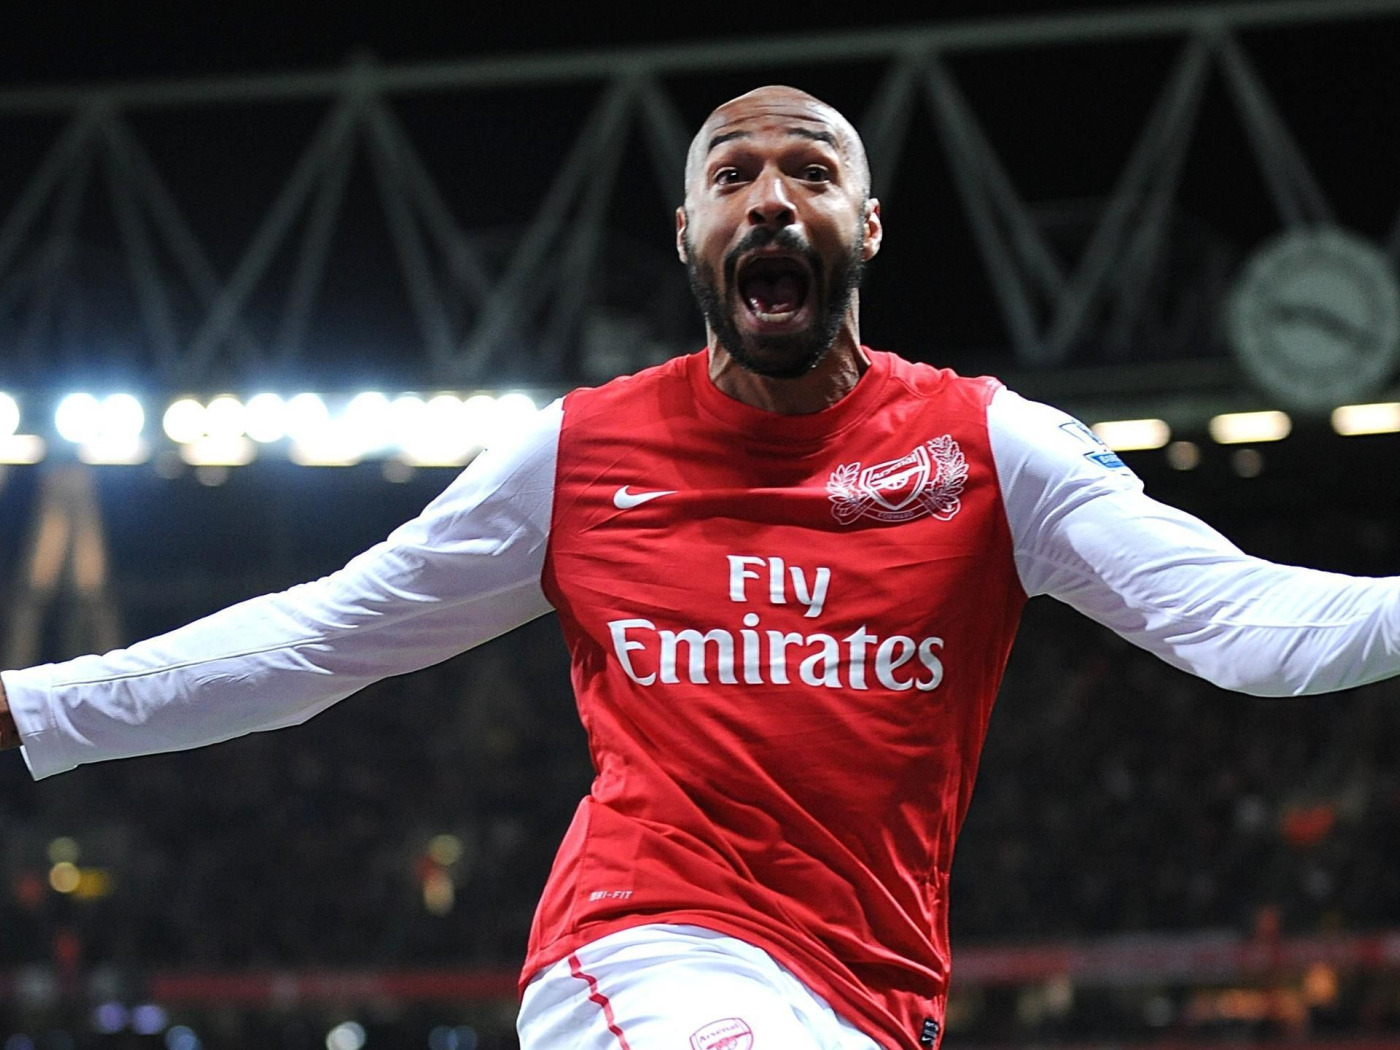 Download wallpaper Thierry Henry, Gunner, French footballer, section sports  in resolution 1400x1050